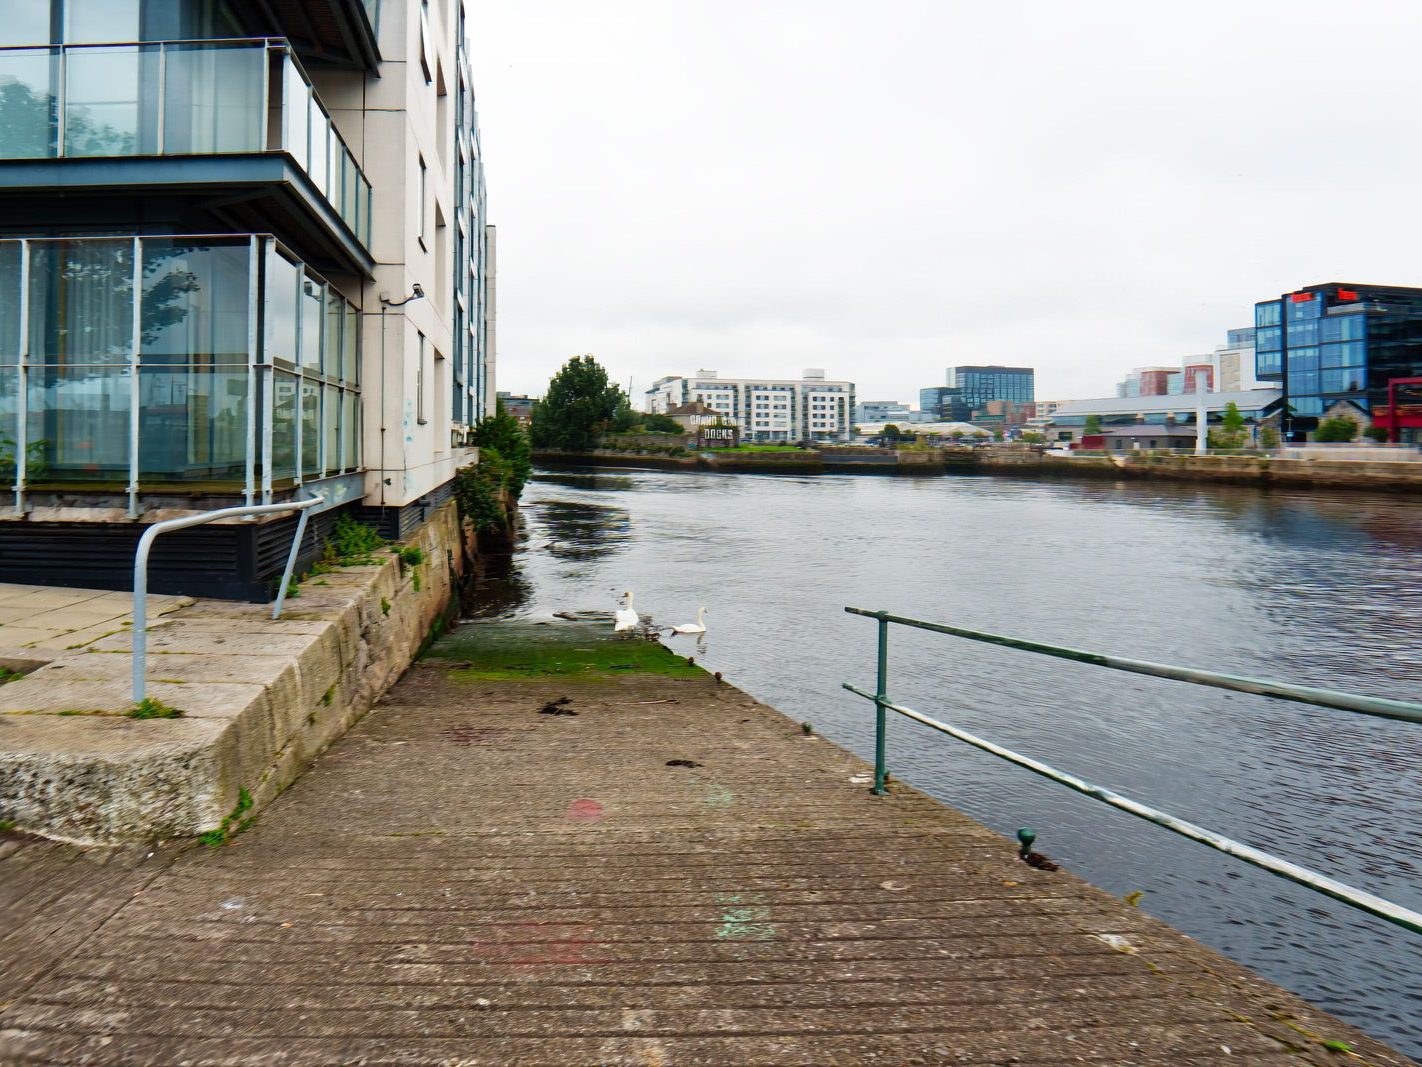 ST PATRICKS ROWING CLUB AND NEARBY [YORK ROAD AND THORNCASTLE STREET] 006